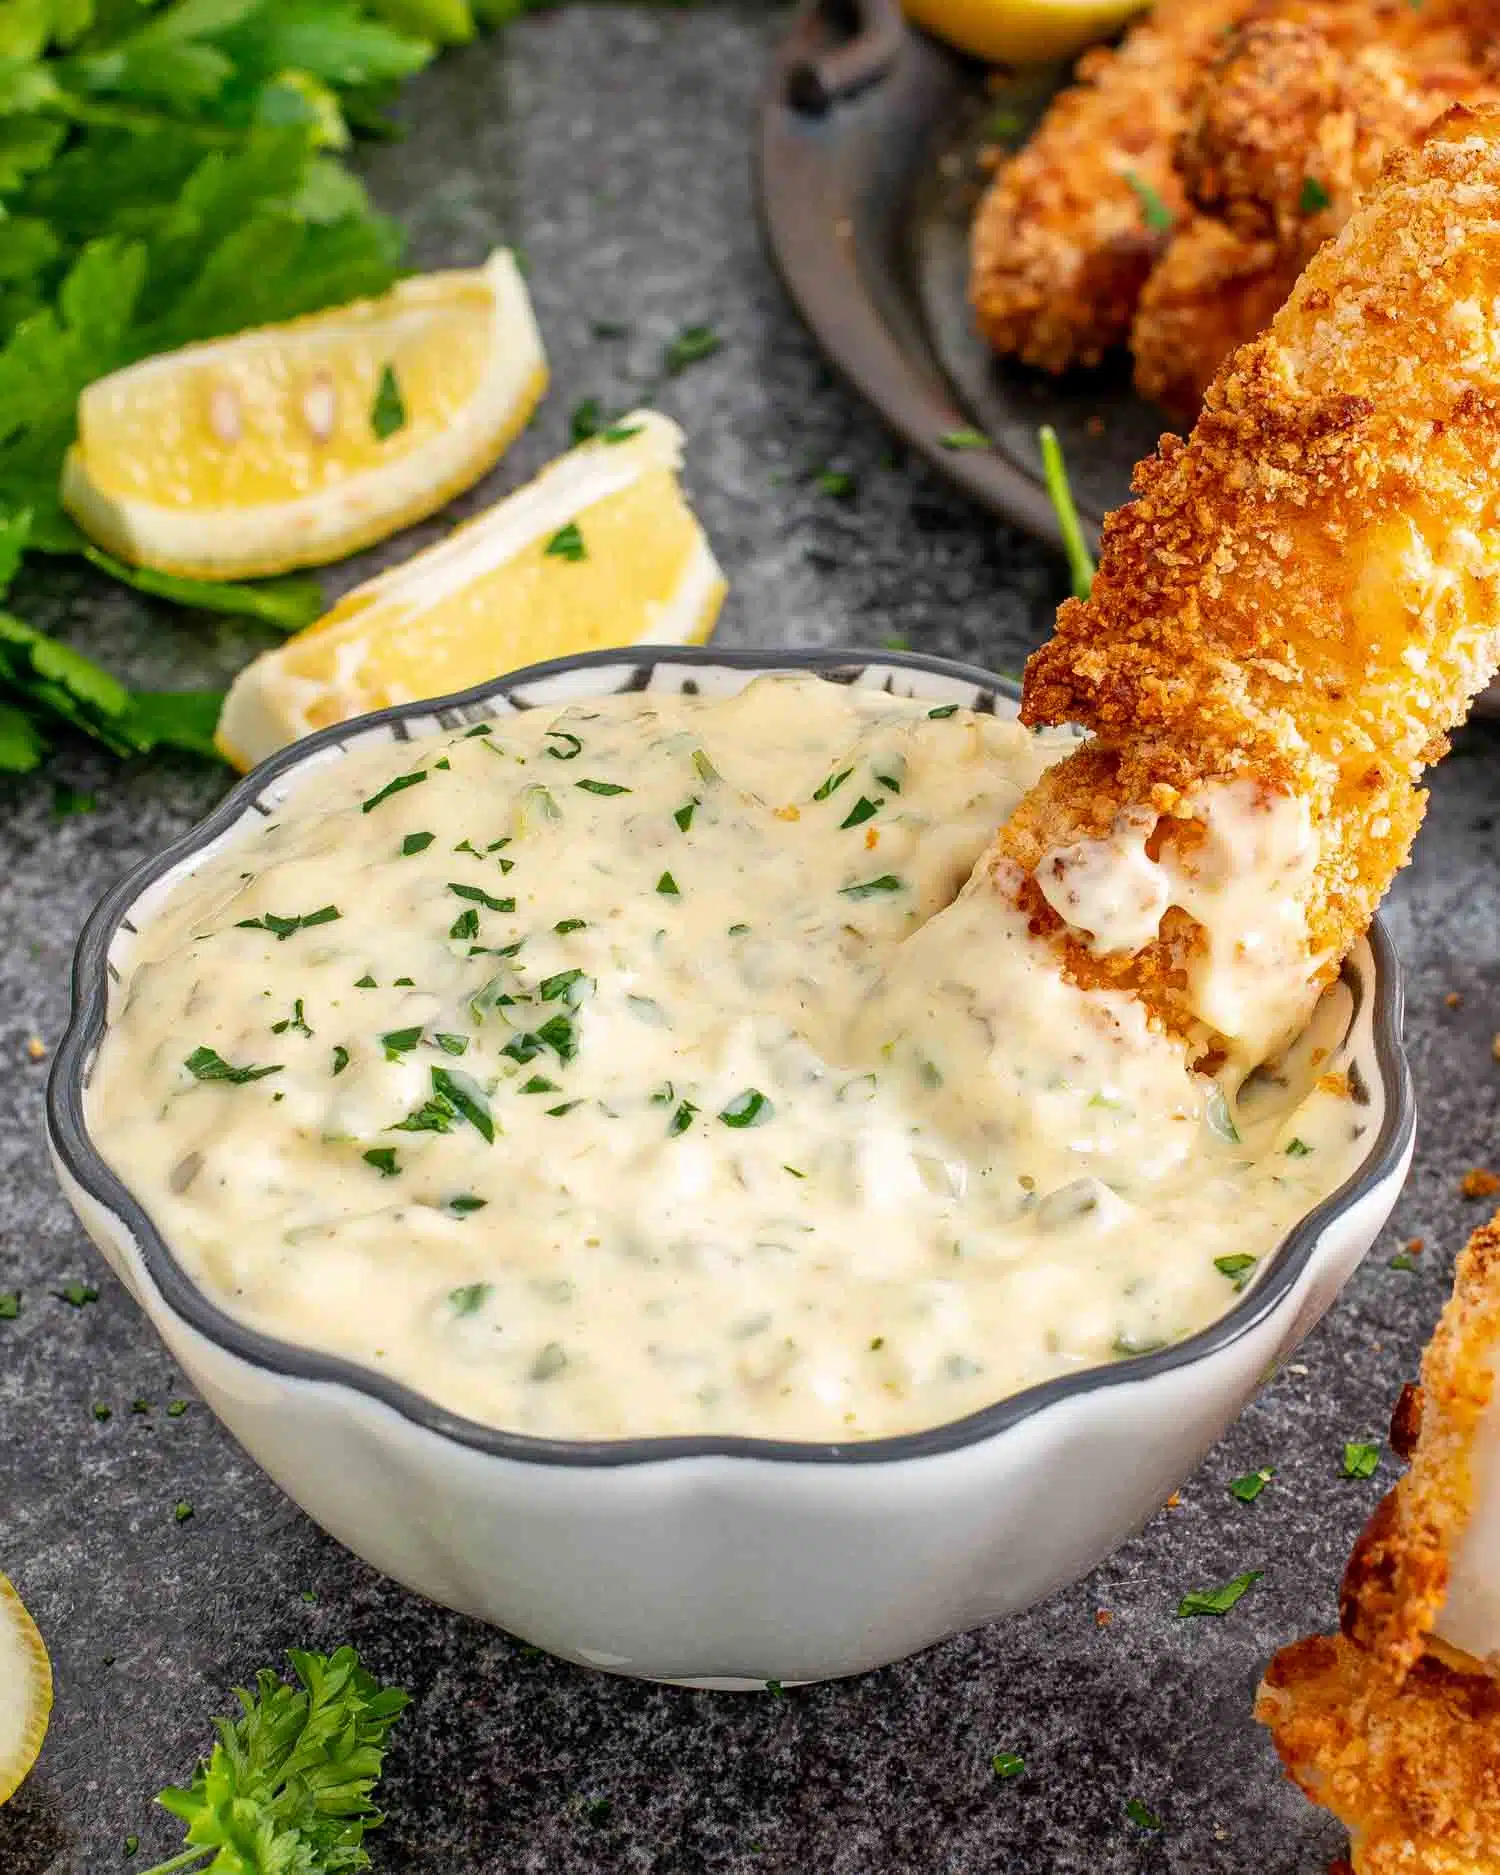 tartar sauce in a little dish with a fish stick in it.